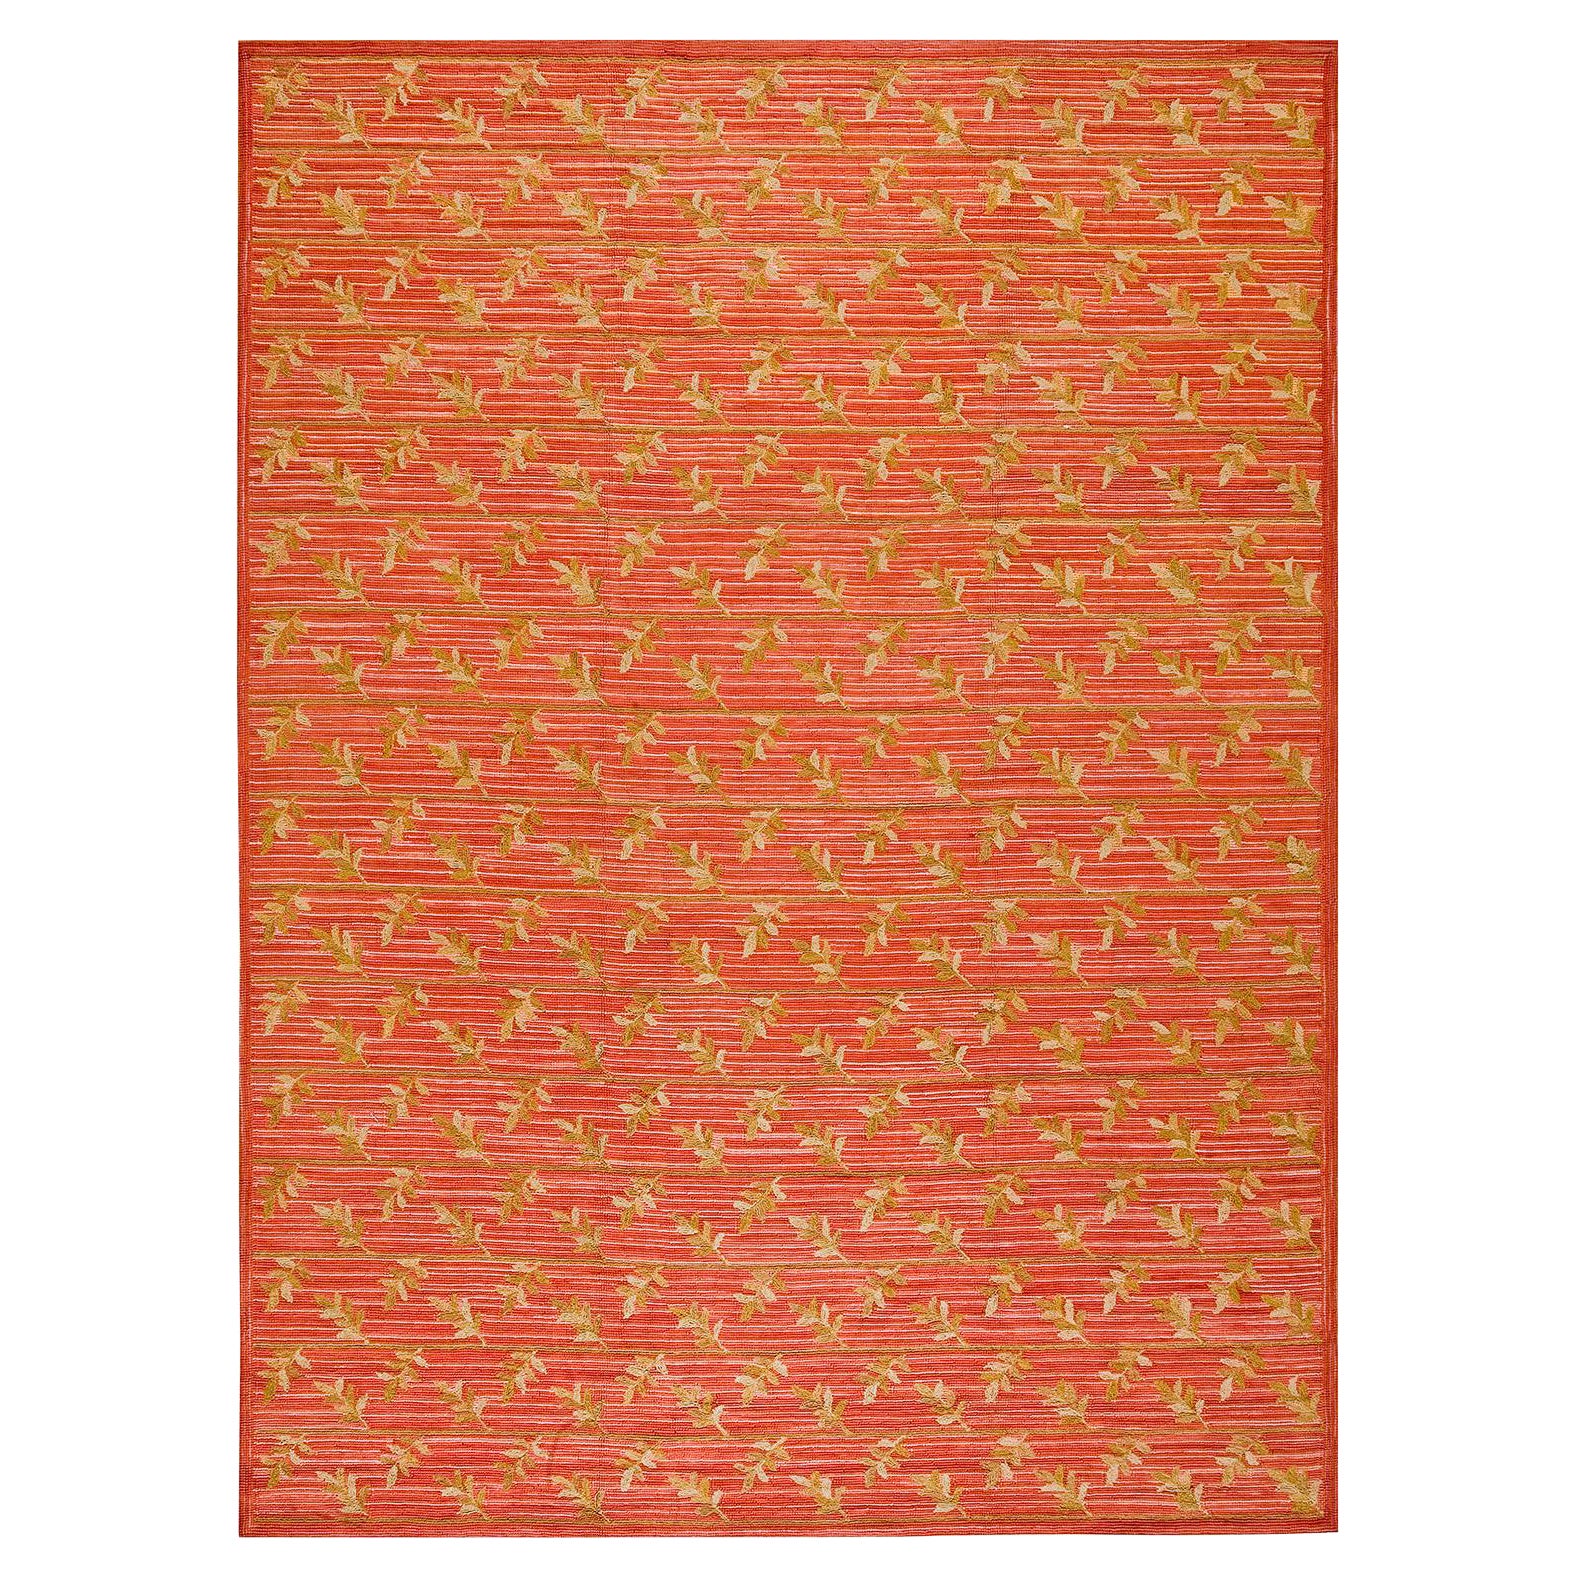 Contemporary American Hooked Rug (8' x 10' - 1244x 305)